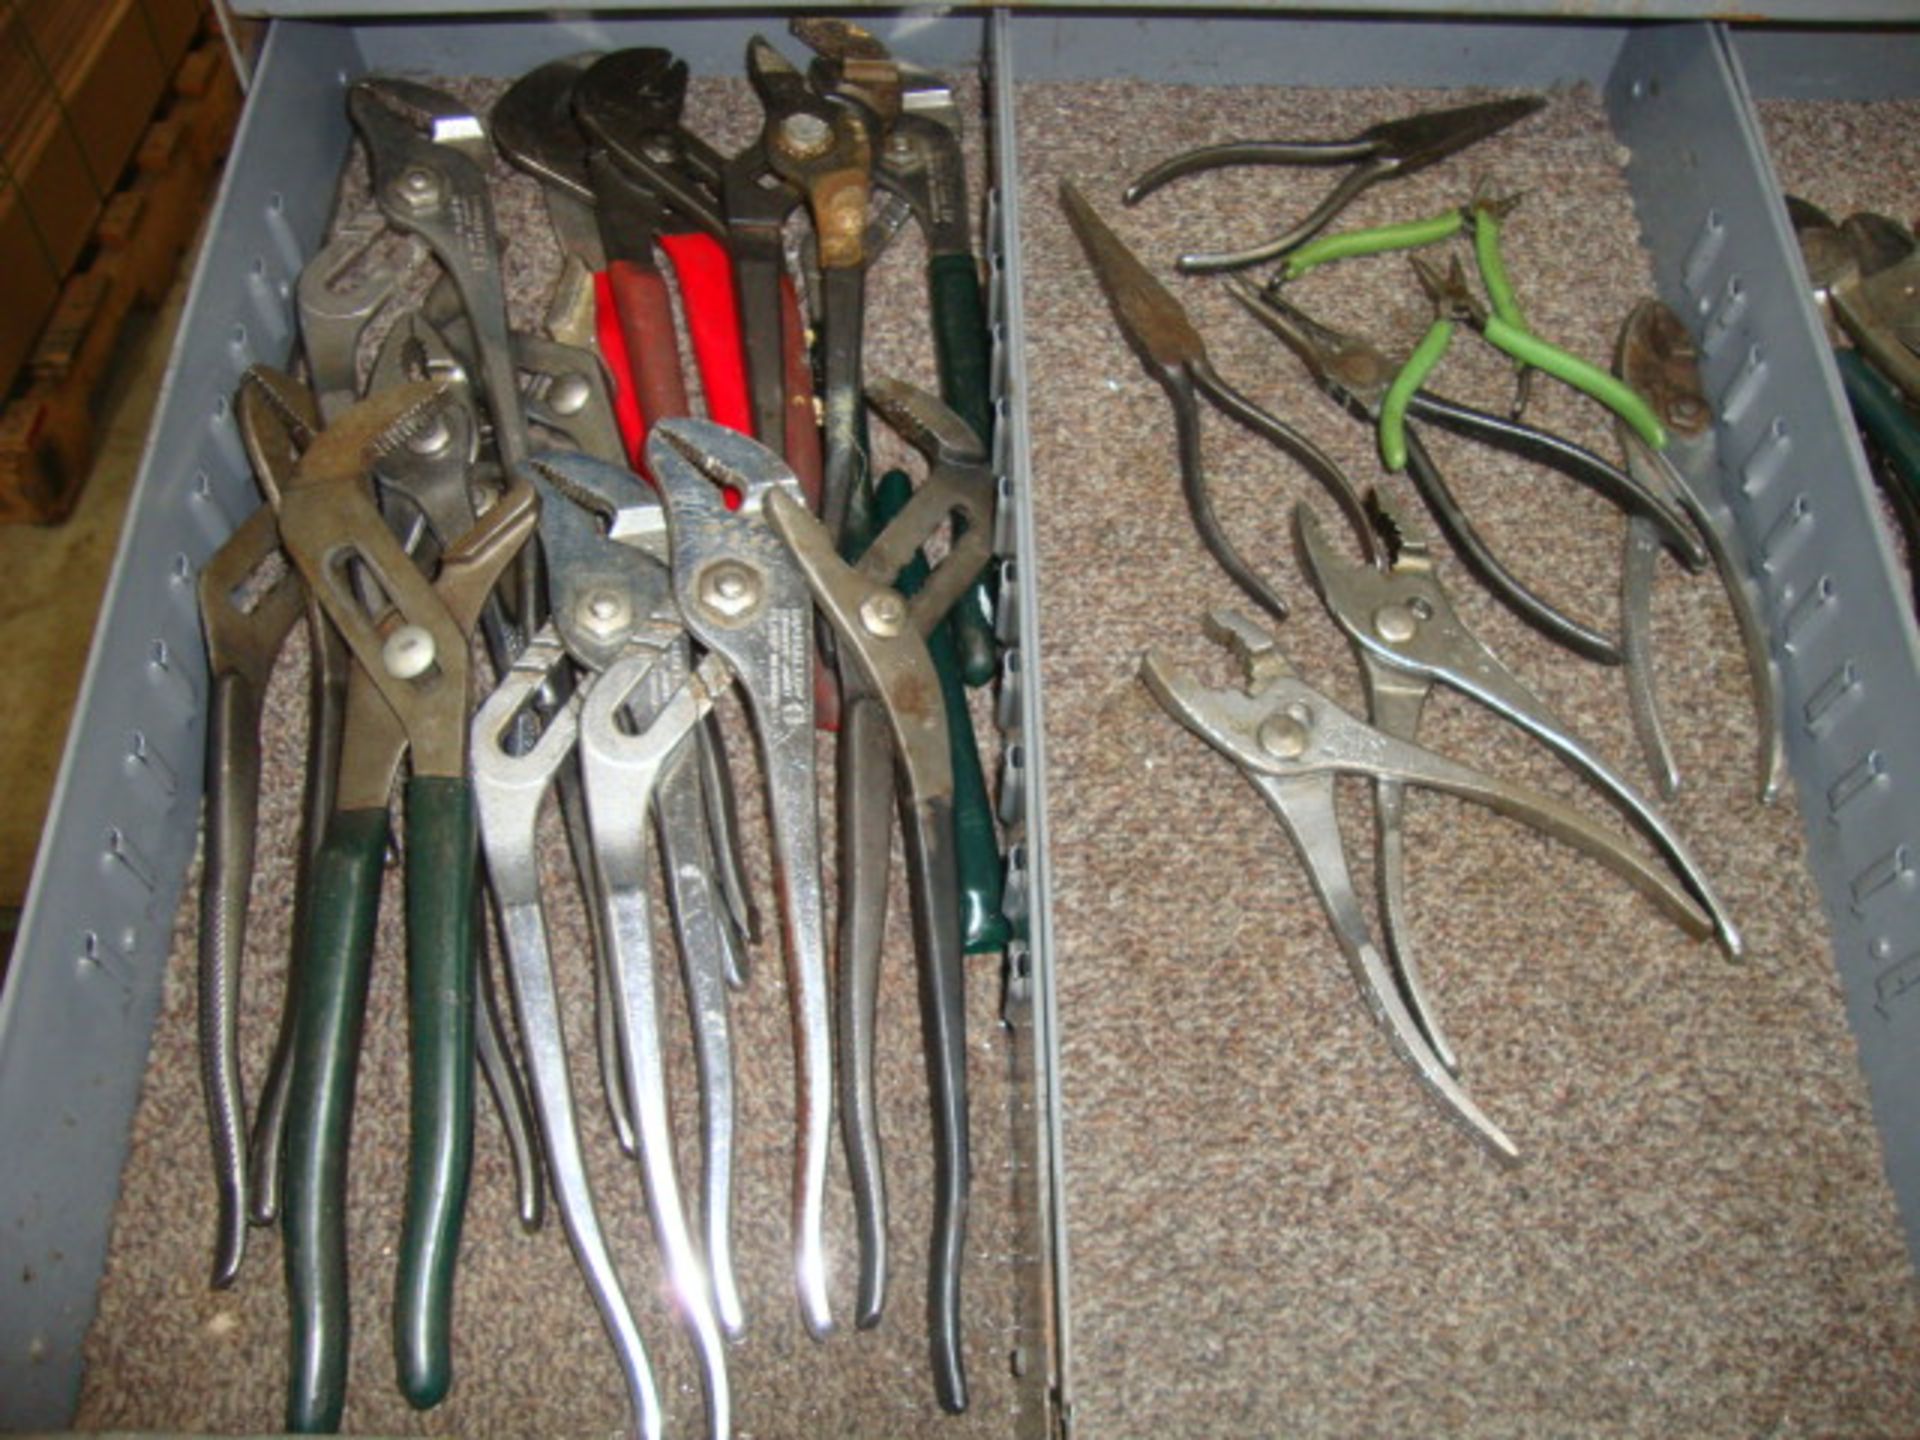 Large Lot of Adjustable Pliers, Wire Cutters, Snap Ring Pliers, etc. NOTE-Tools Only- No Drawers - Image 2 of 3